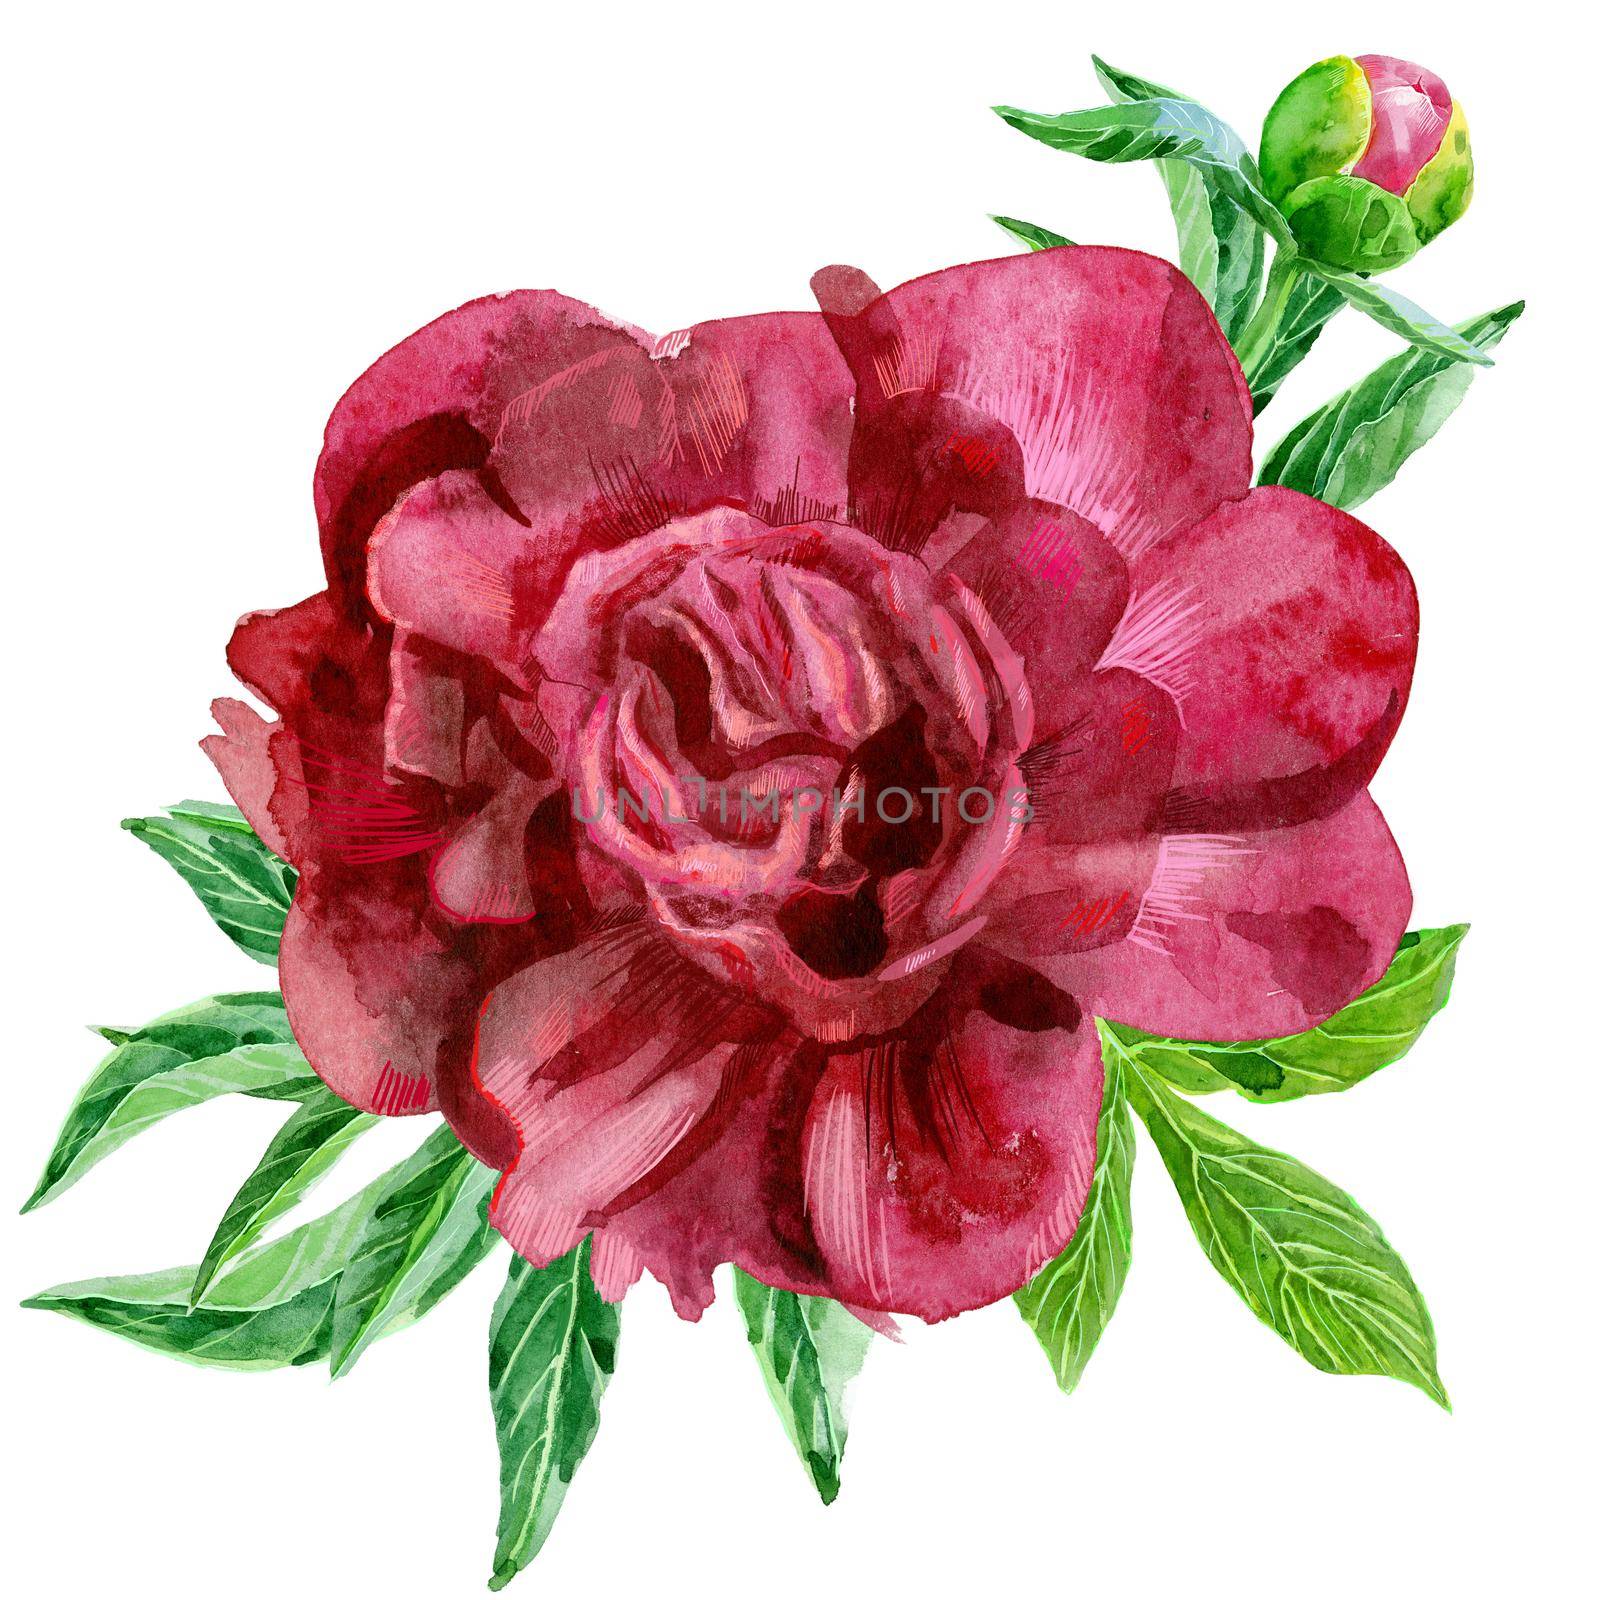 Luxurious dark pink peony with buds and leaves. Vintage floral elements with peony flower and leaves isolated on white background. Hand drawn